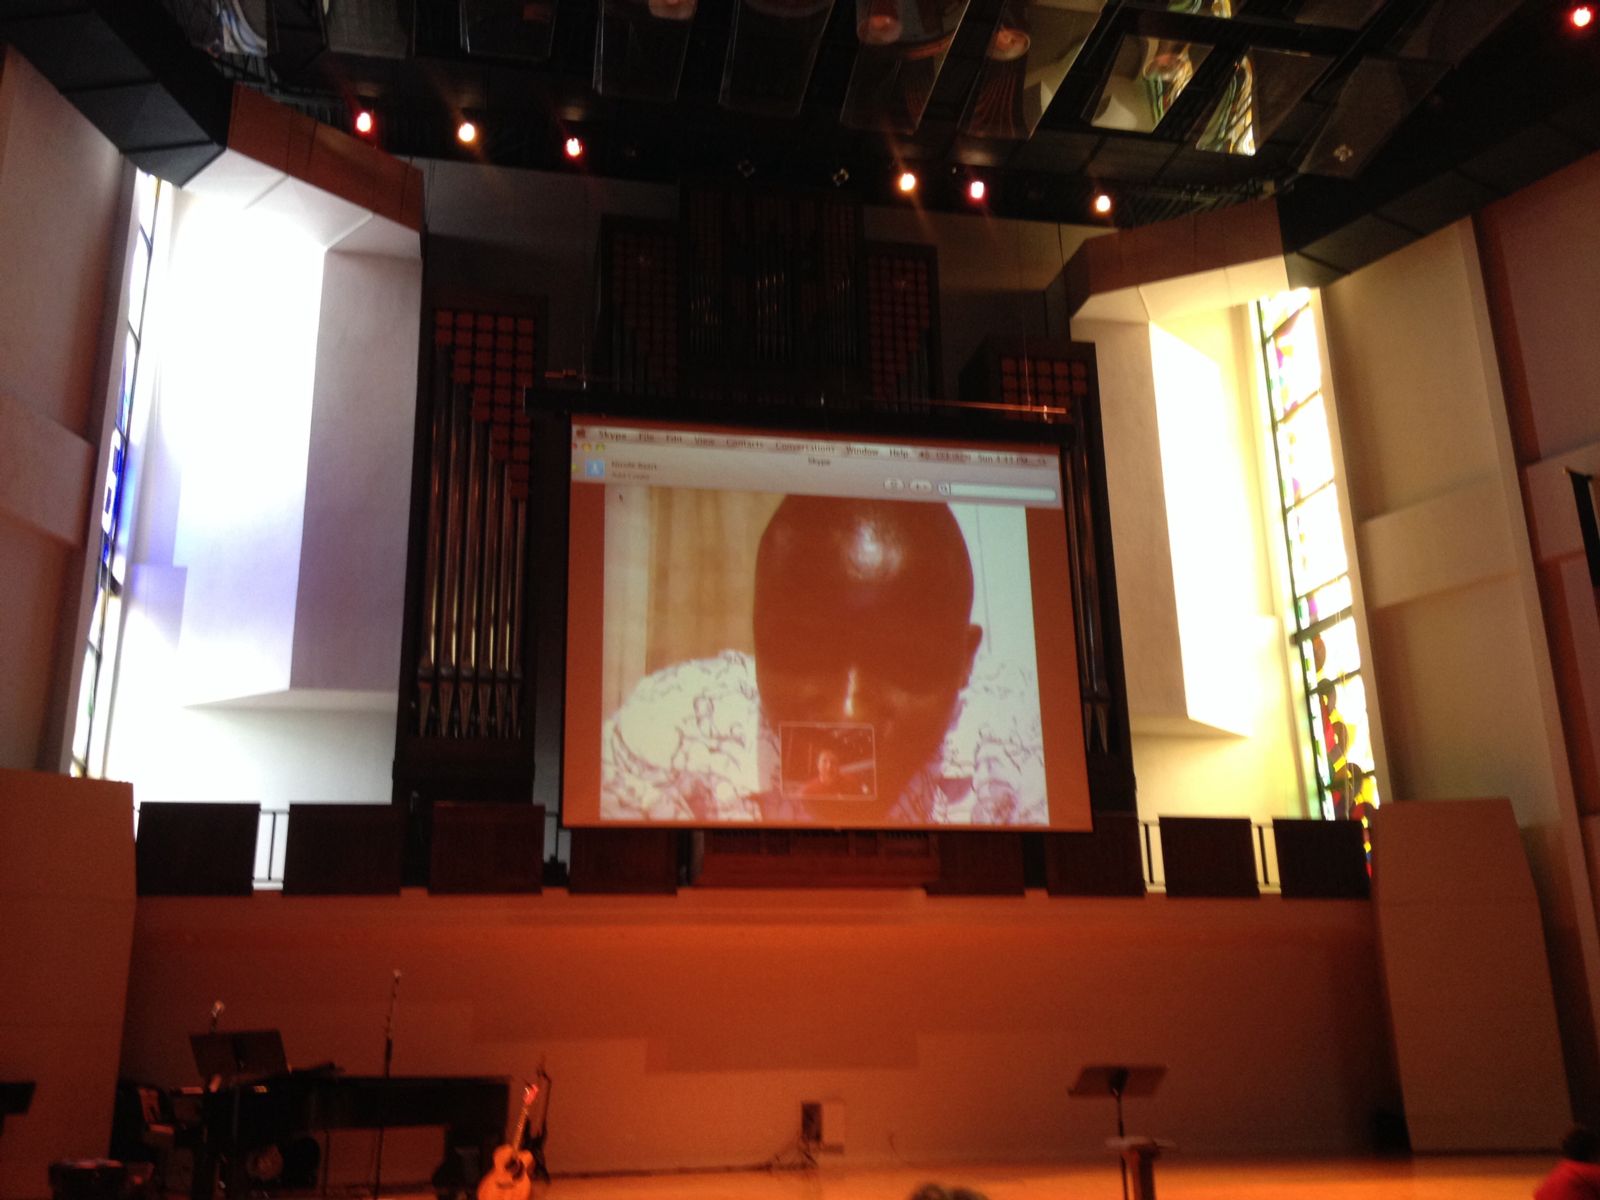  The call from Pastor Emmanuel. We were so glad to be able to speak with him even though he couldn't be here in person! 